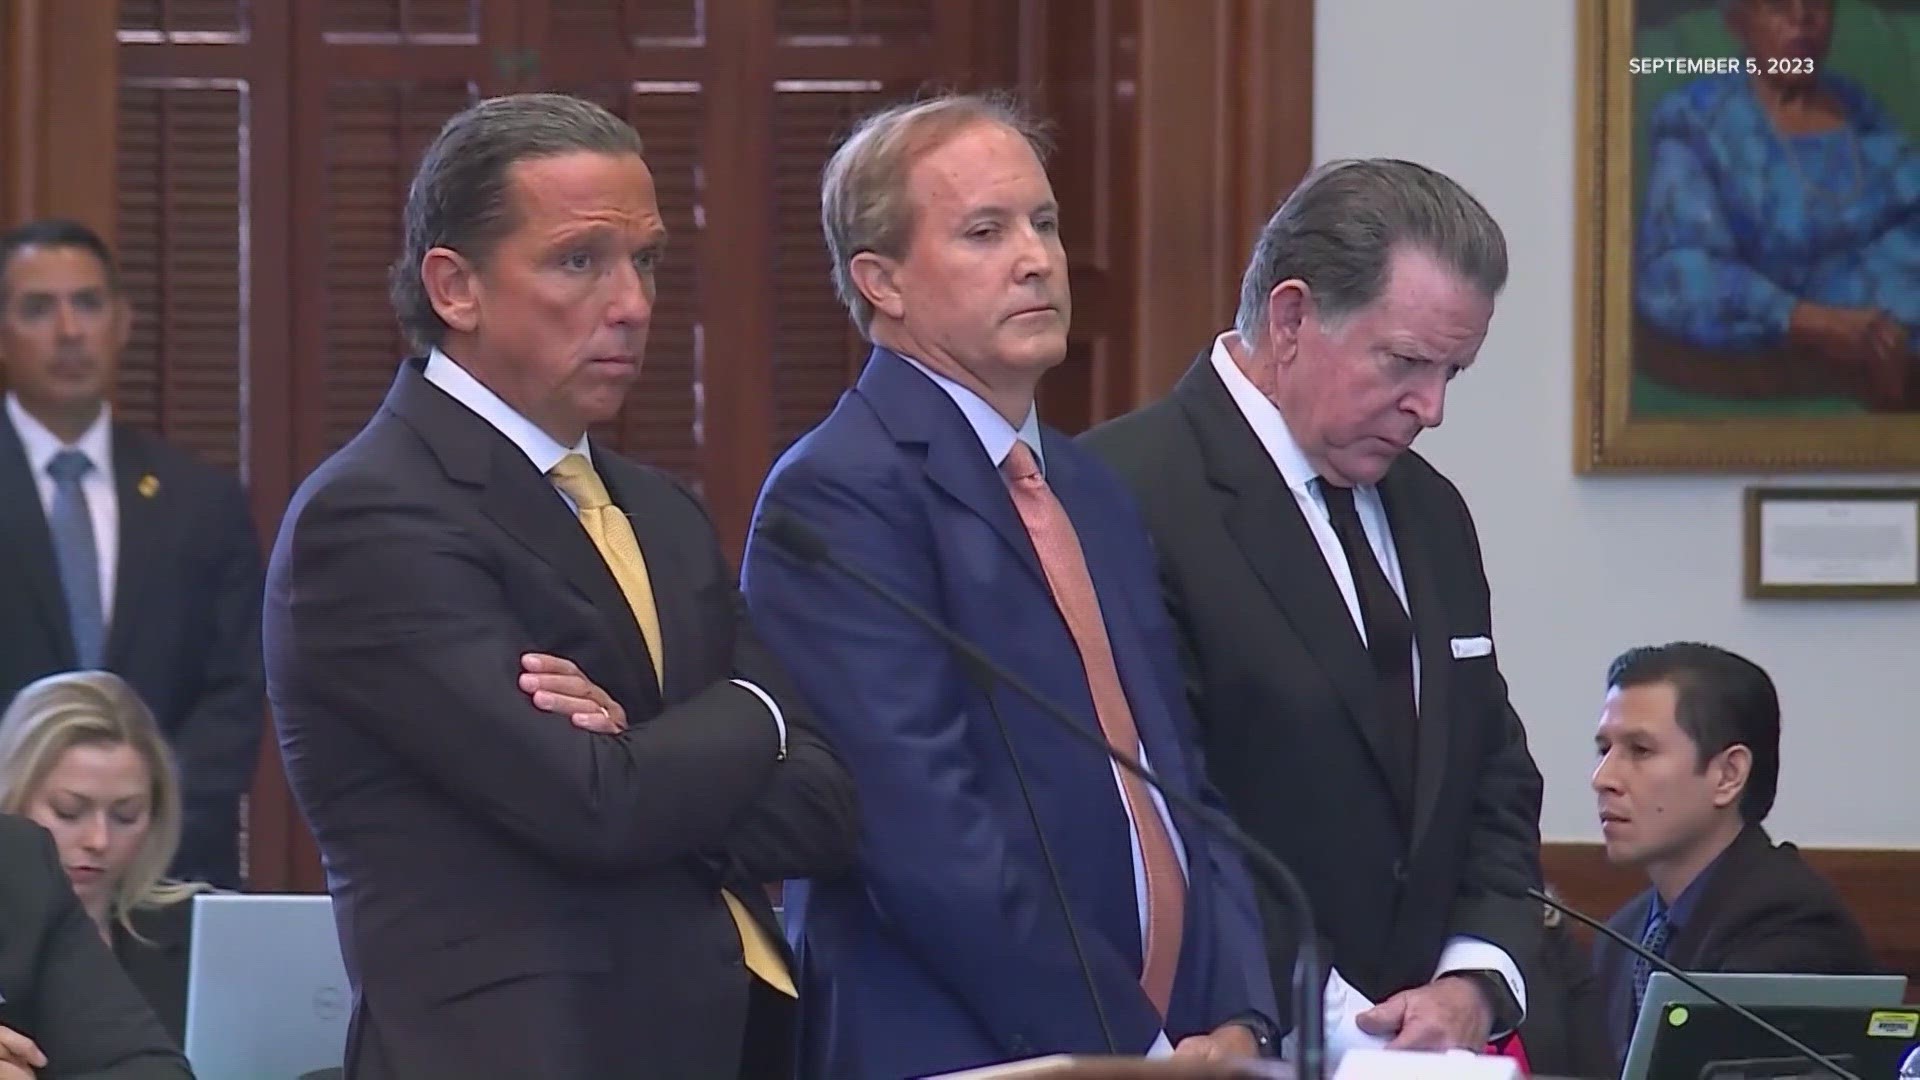 Documents show around $3.3 million of the $4.3 million total was billed to Paxton's prosecution.